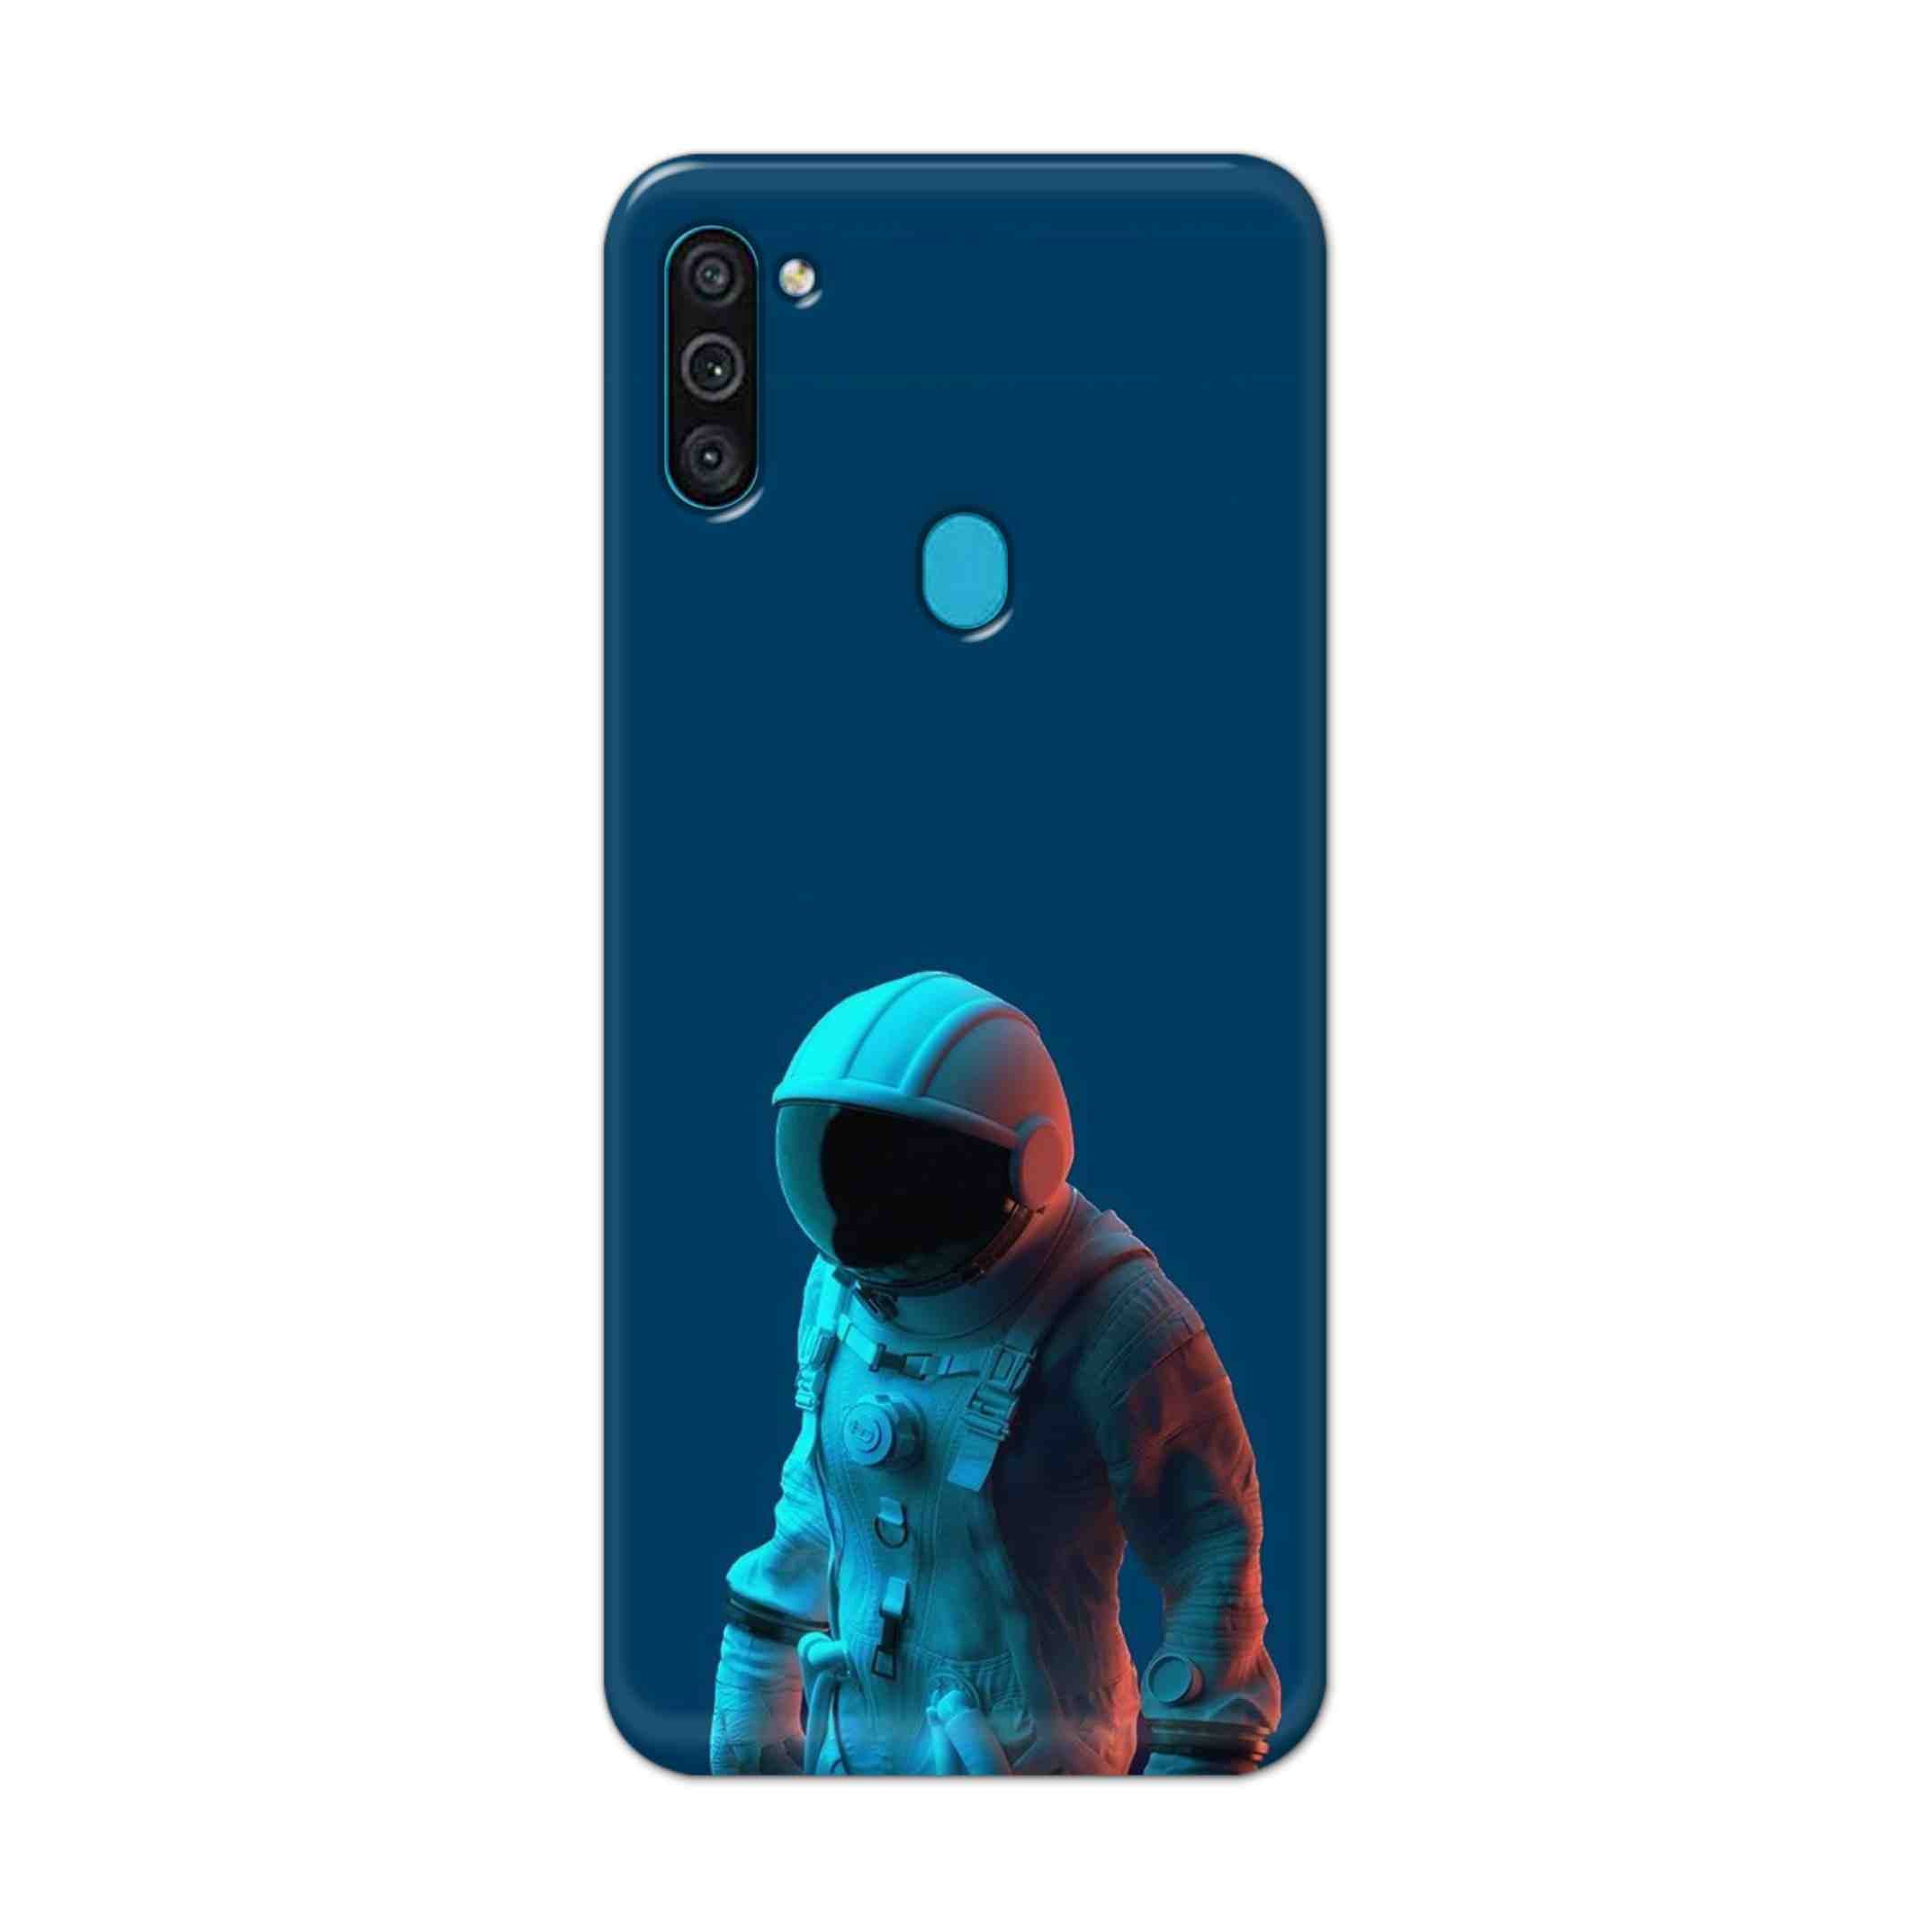 Buy Blue Astronaut Hard Back Mobile Phone Case Cover For Samsung Galaxy M11 Online